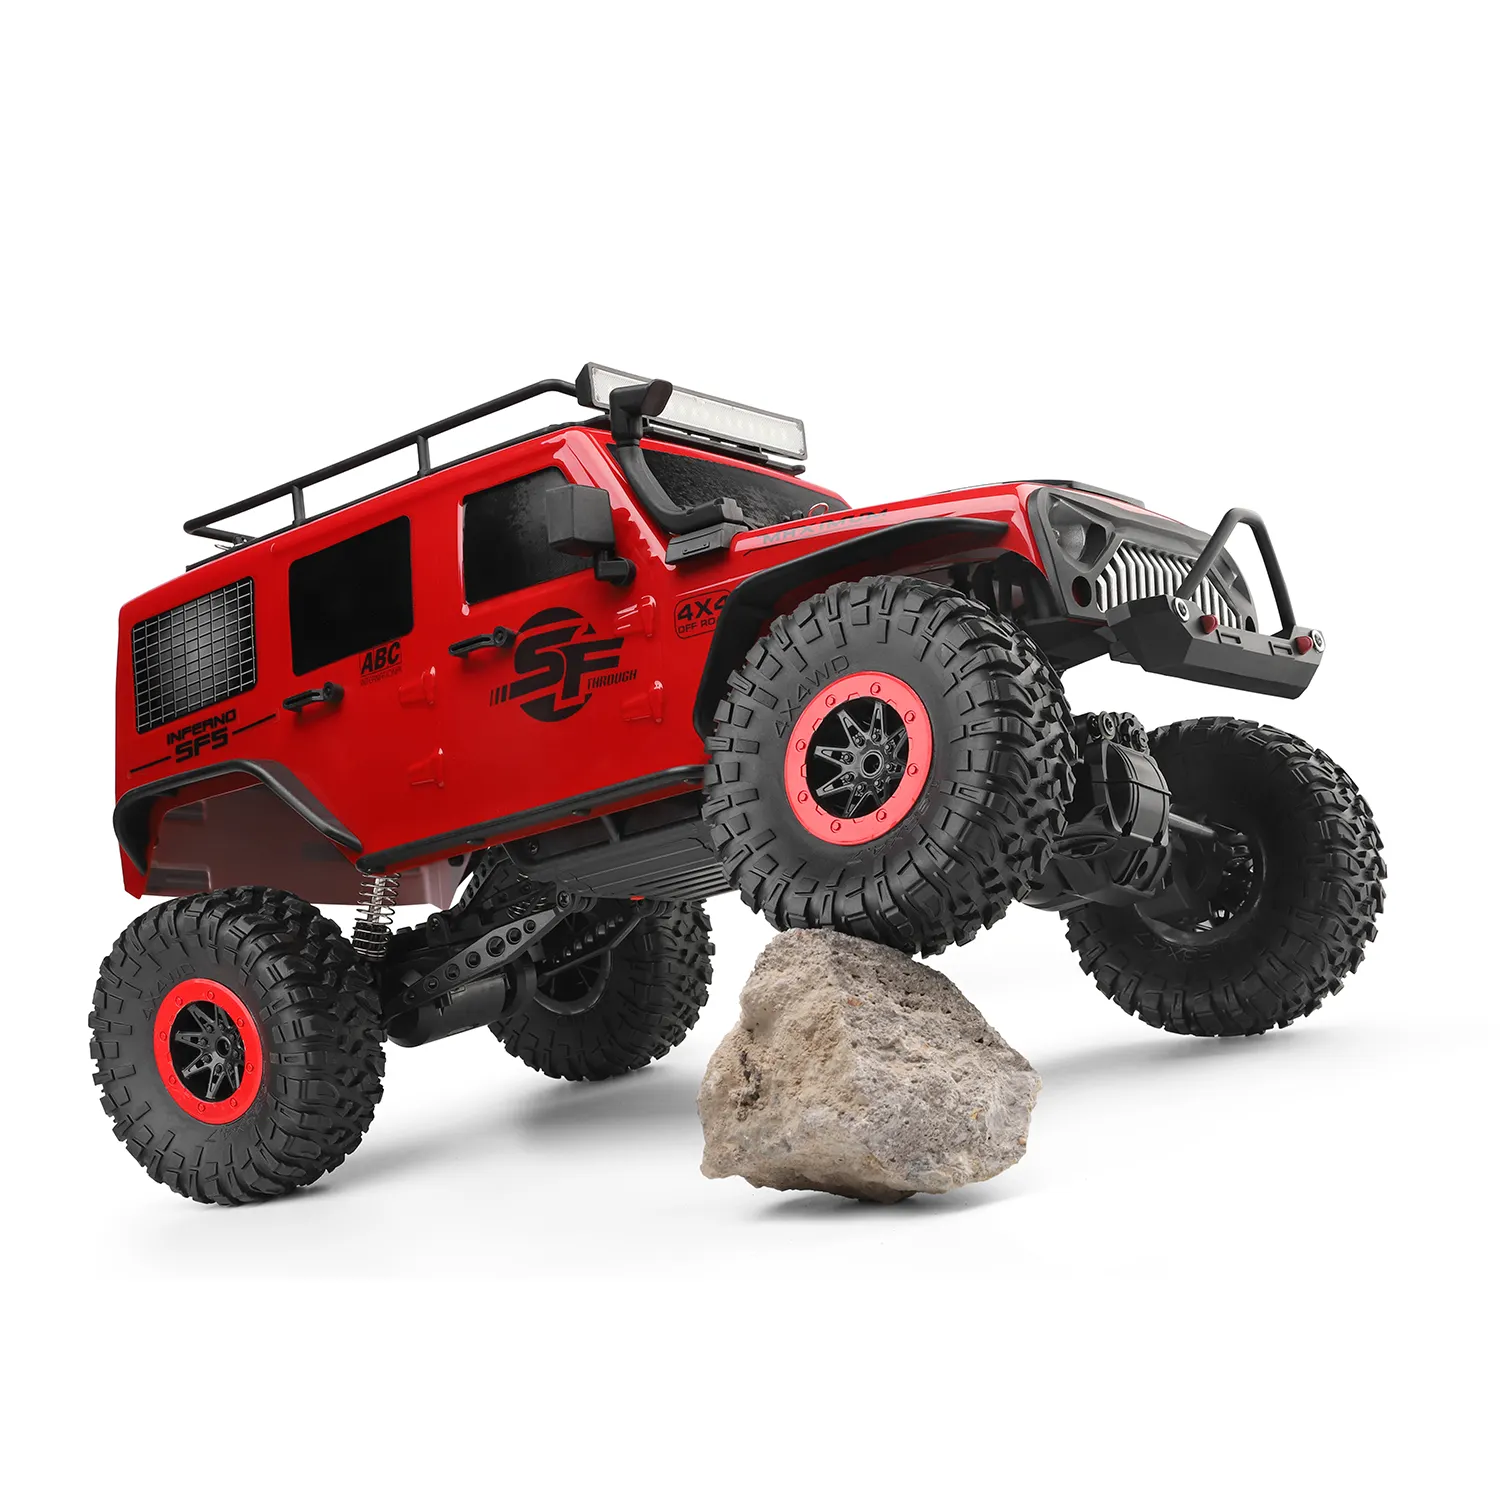 WLTOYS 104311 RC CAR 1/10 Scale 2.4GHz 4WD RC Crawler Highlysimulated Model of JEEP Wrangler RTR With LED Light For Kids Gift